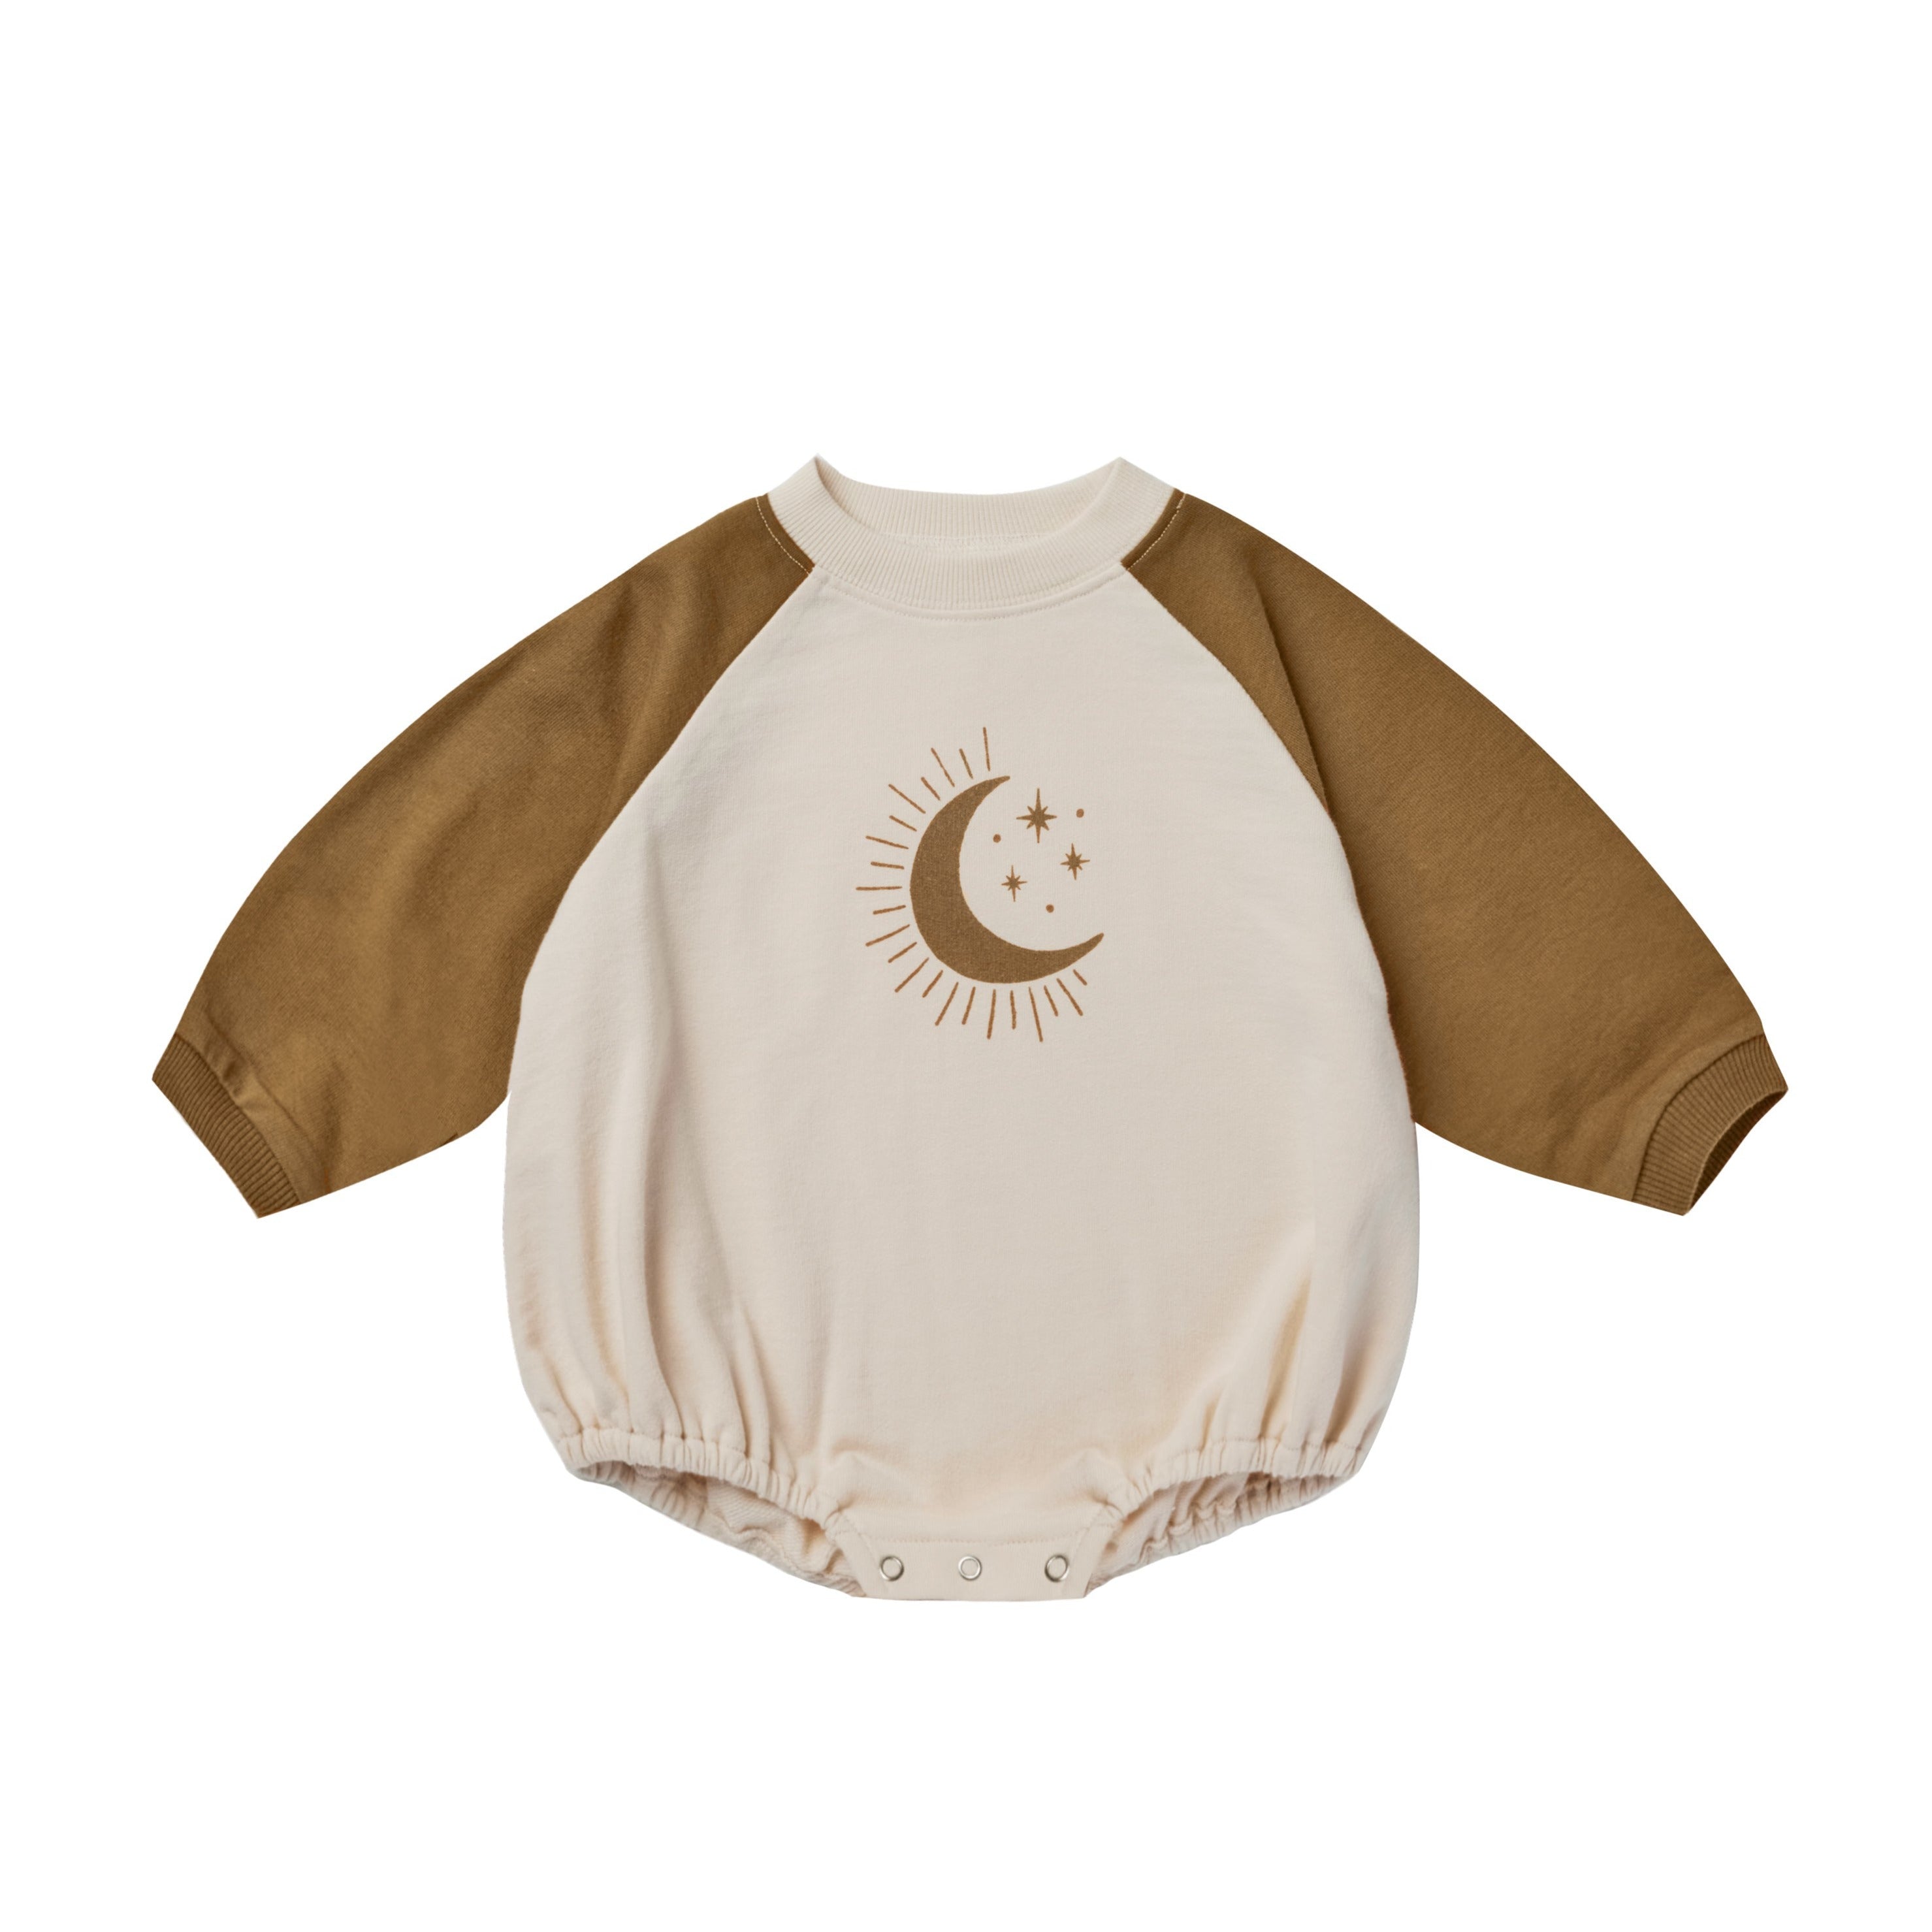 Rylee and Cru Moonlight romper and knitted hat at Bonjour Baby Baskets